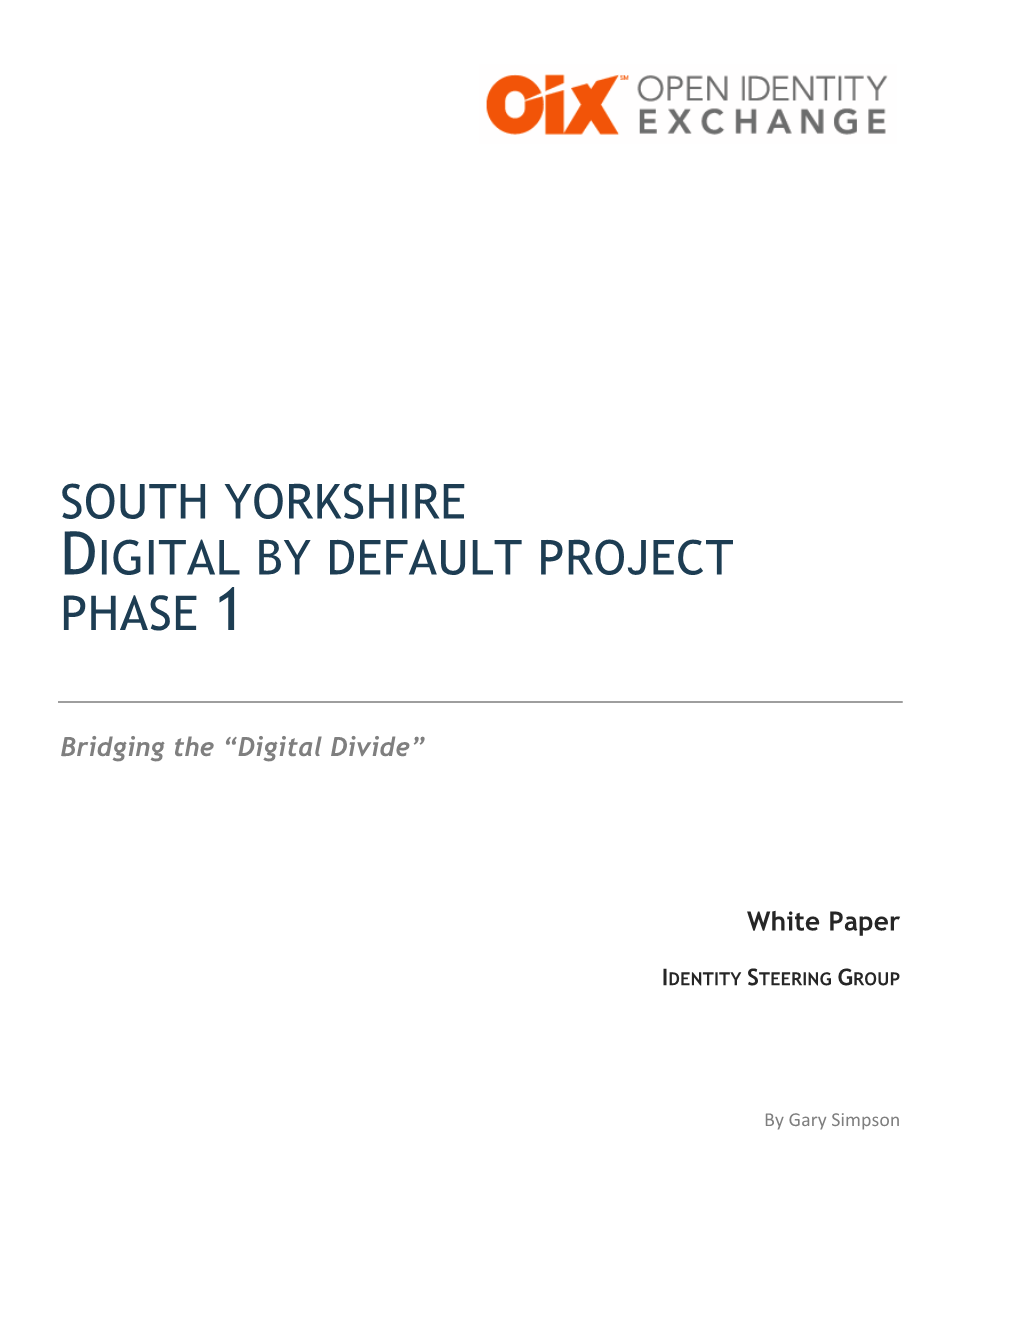 South Yorkshire Digital by Default Project Phase 1